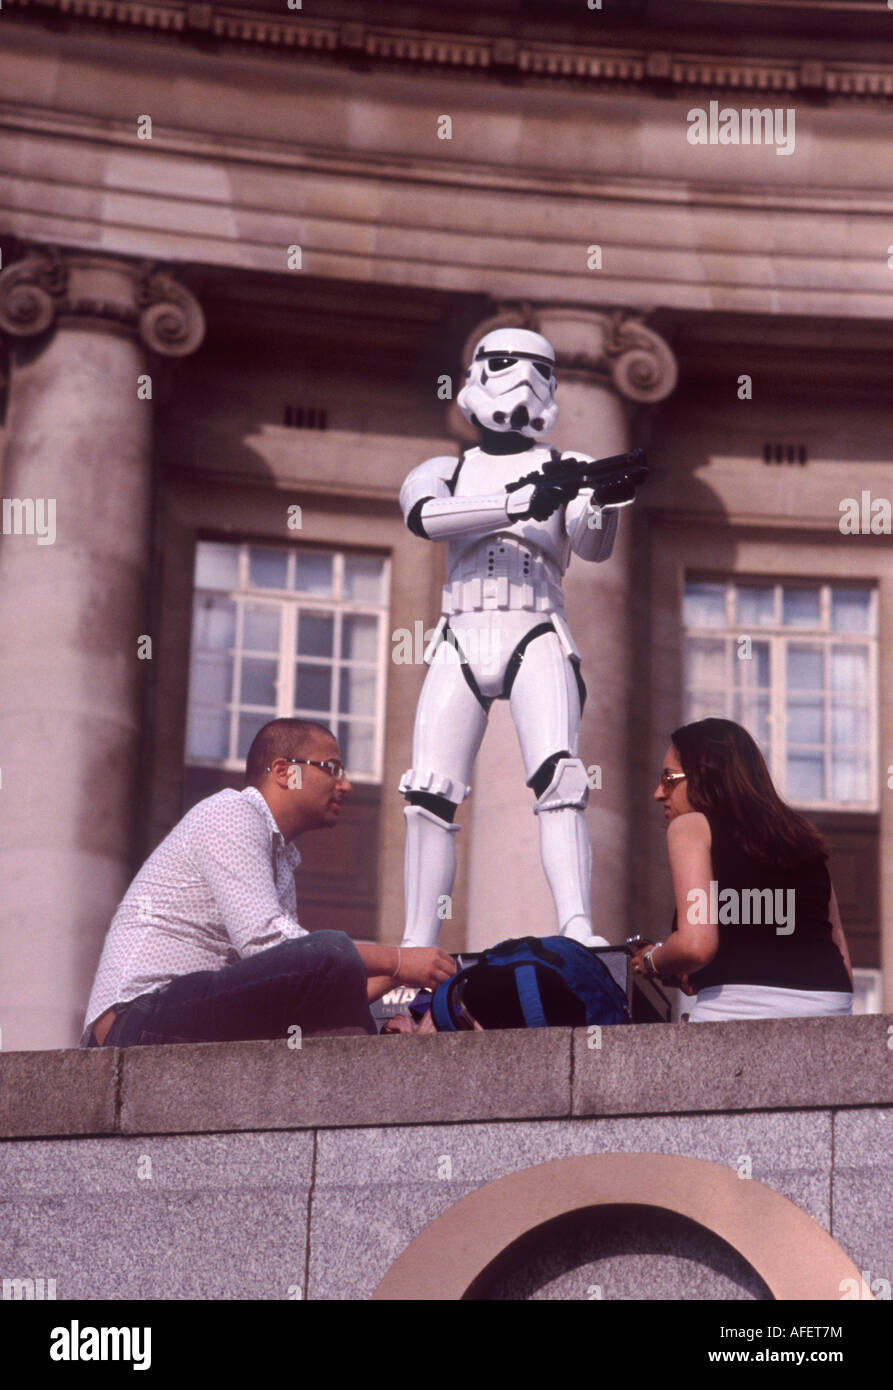 Tourist couple sitting before a Storm Trooper at London County Hall promoting 'Star Wars - The Exhibition' Stock Photo